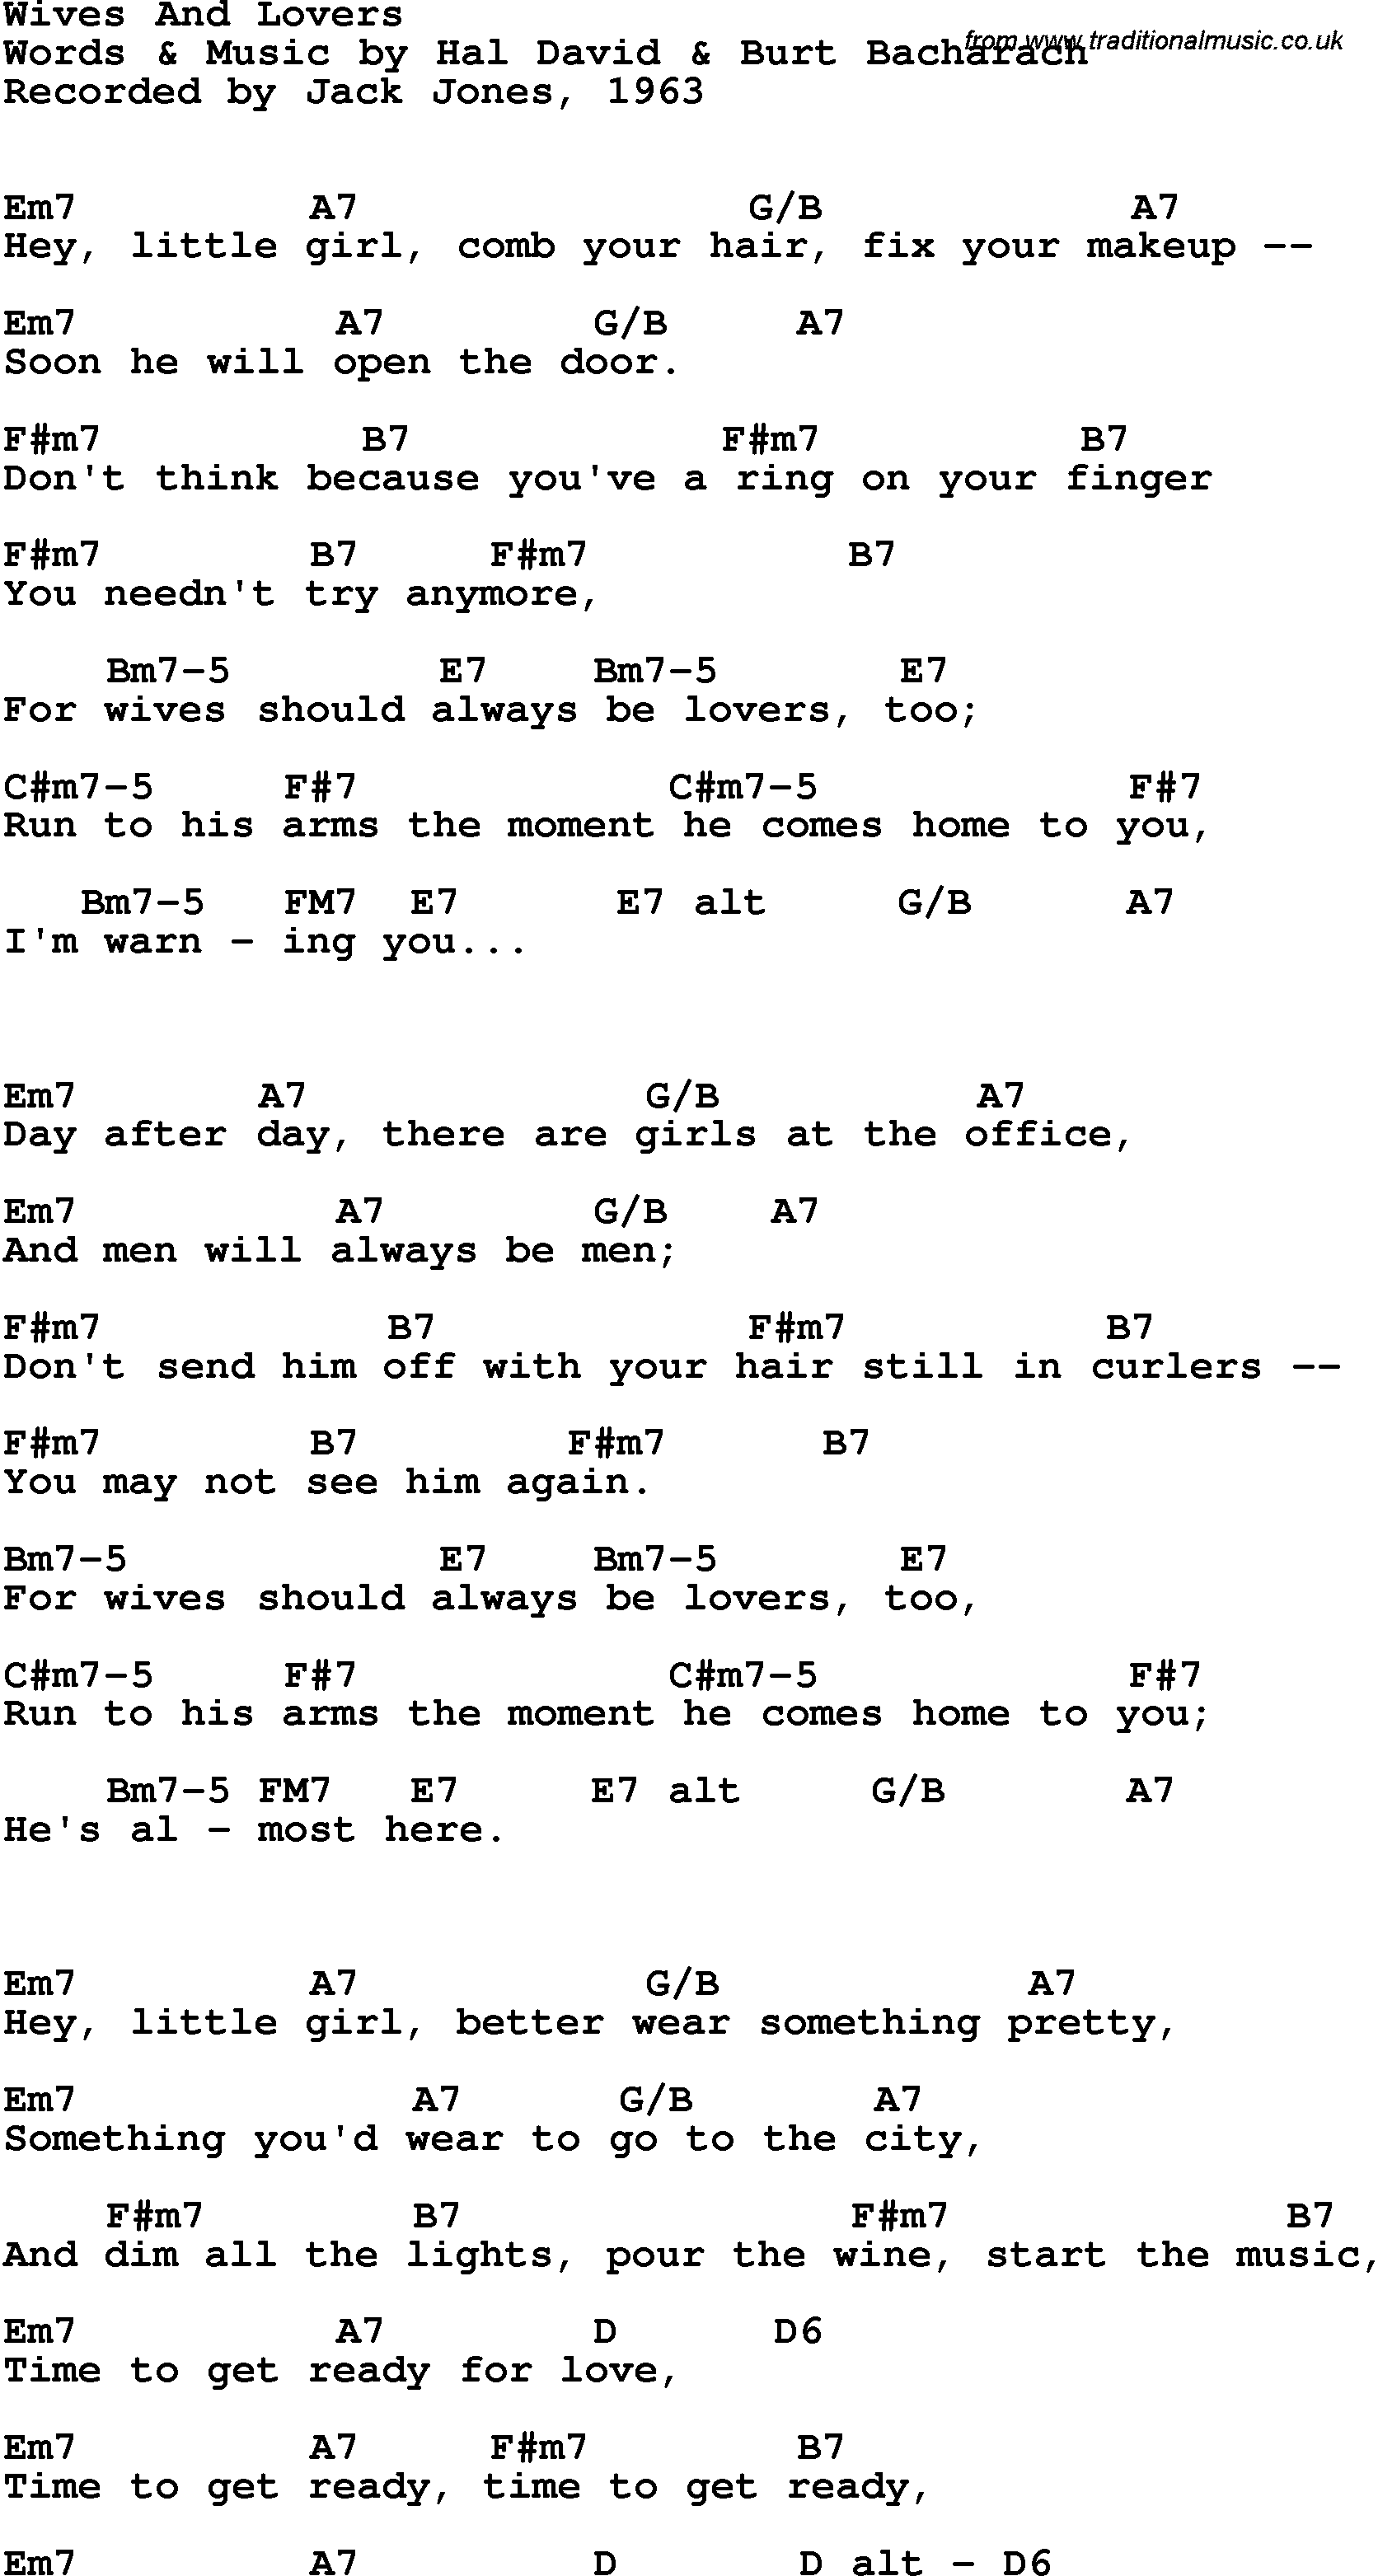 Song Lyrics with guitar chords for Wives And Lovers - Jack Jones, 1963